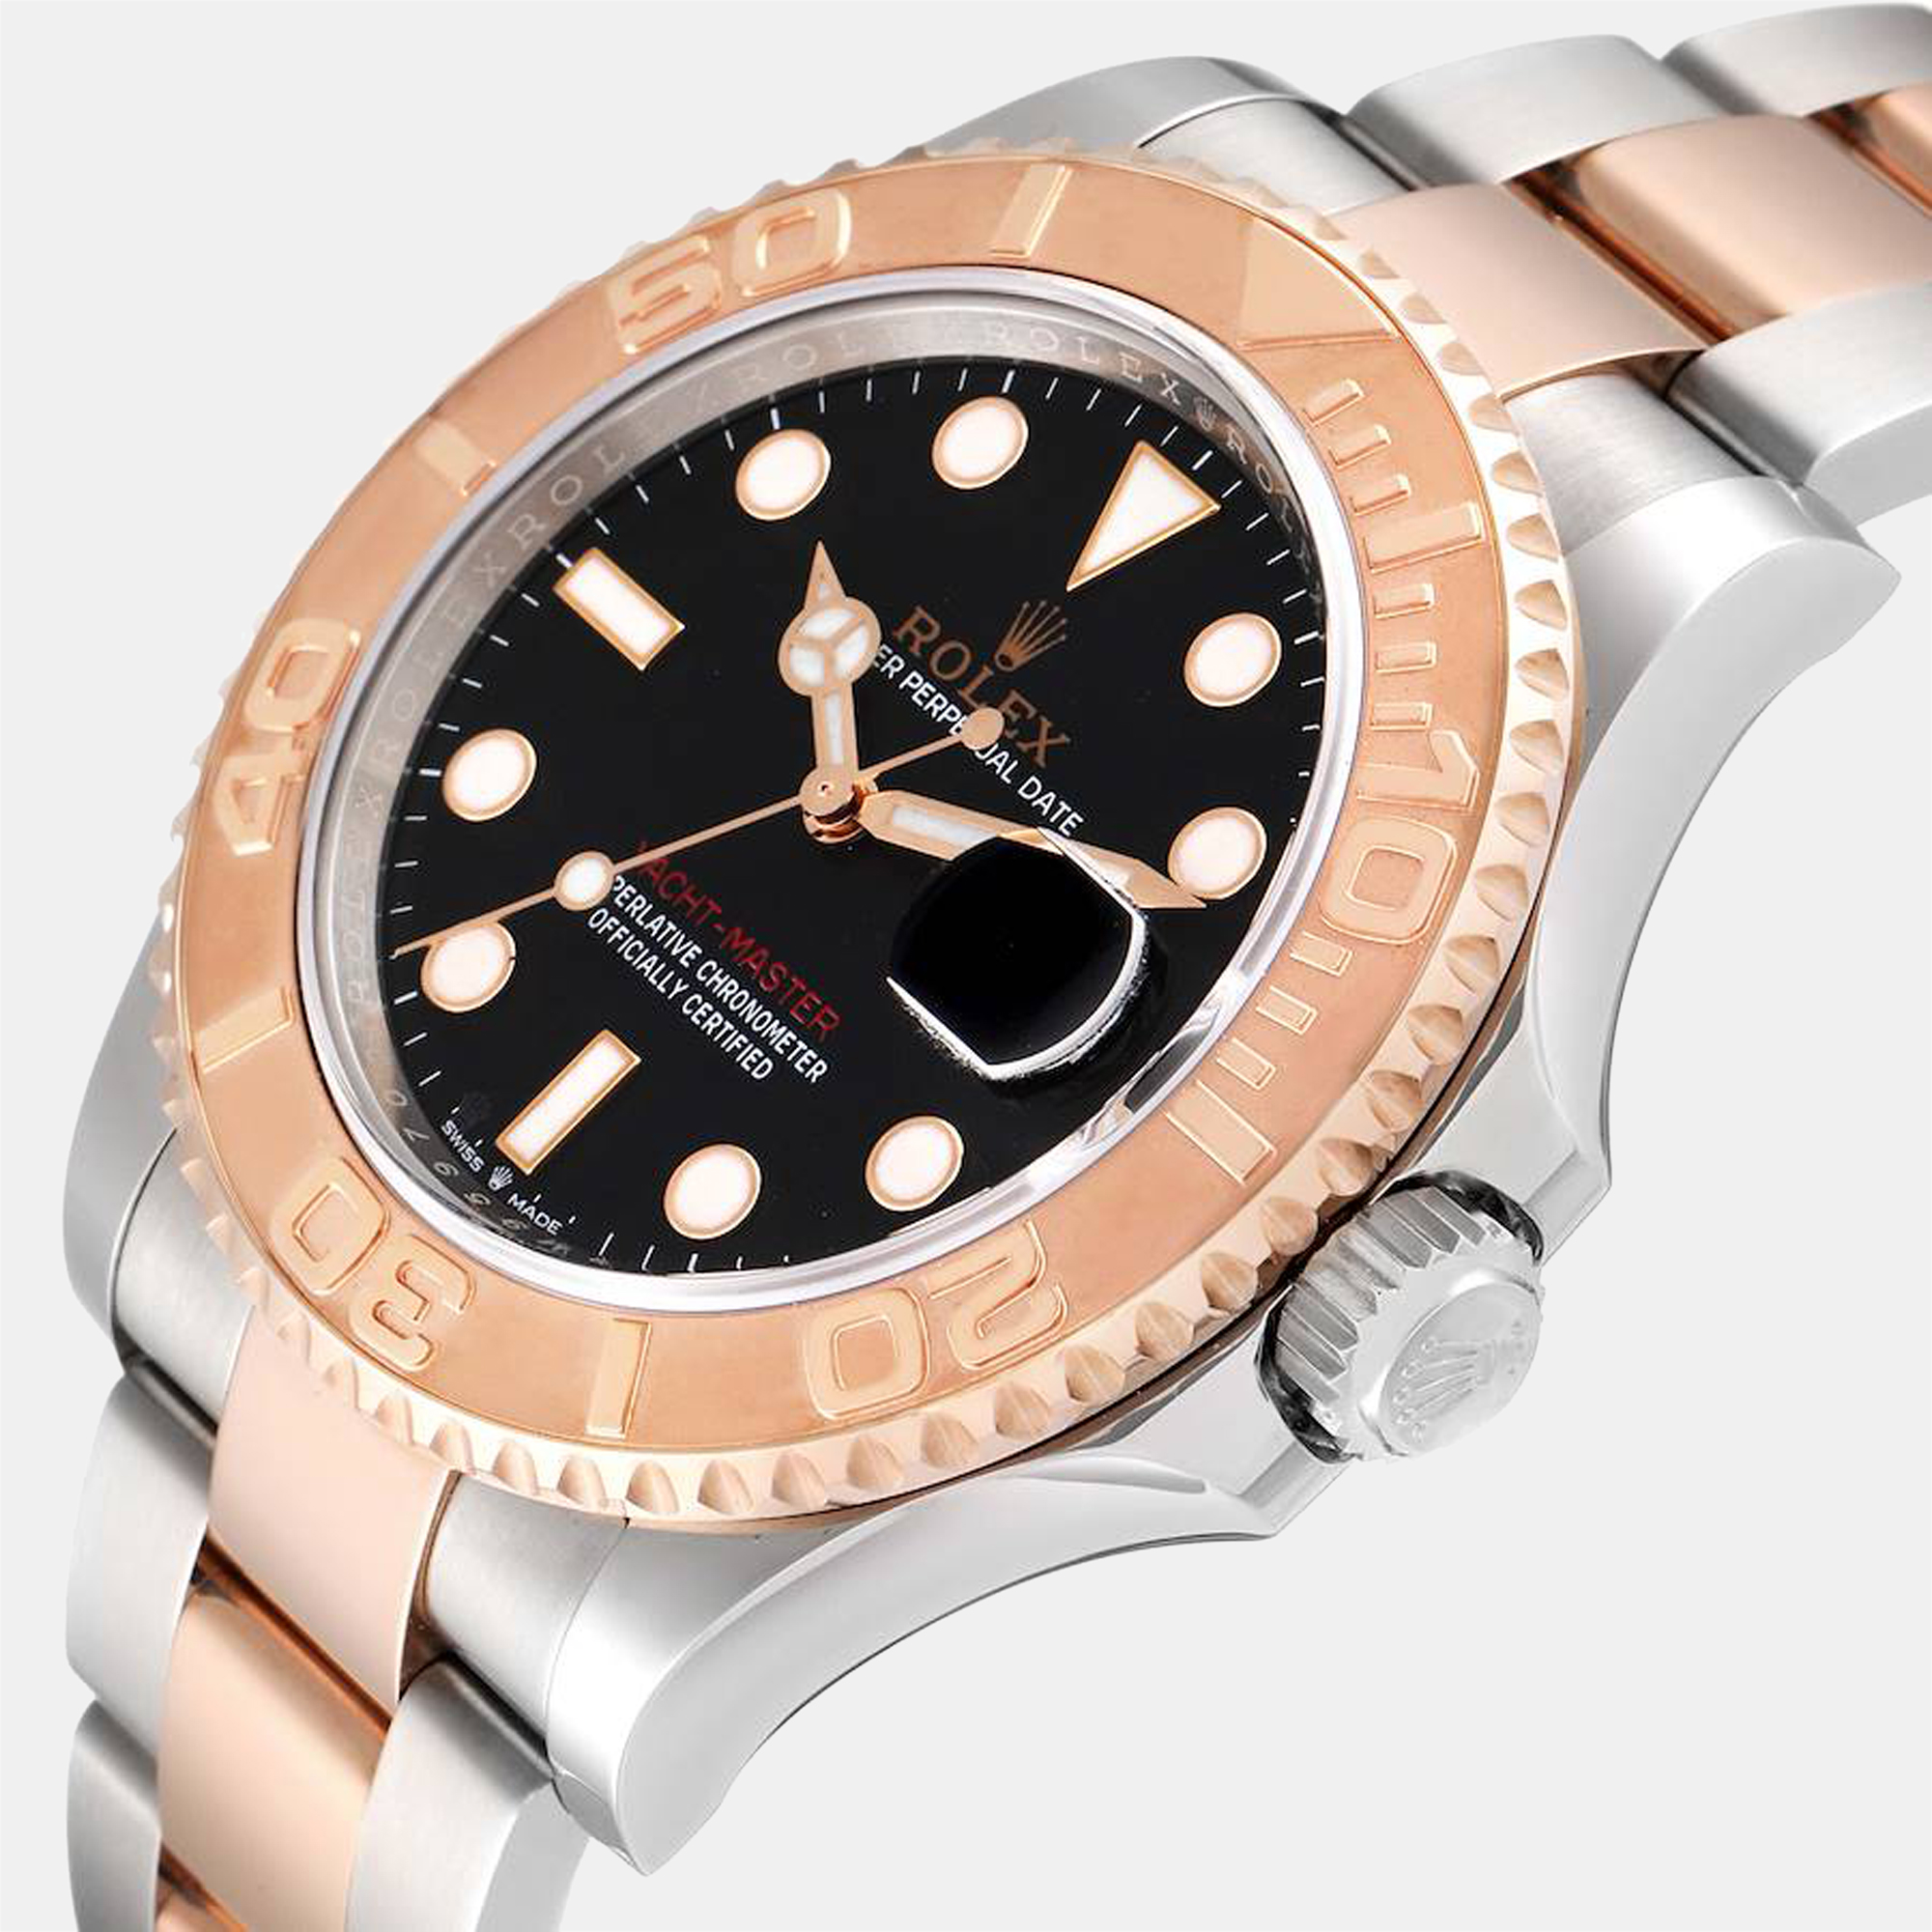 

Rolex Black 18K Rose Gold And Stainless Steel Yacht-Master 126621 Automatic Men's Wristwatch 40 mm